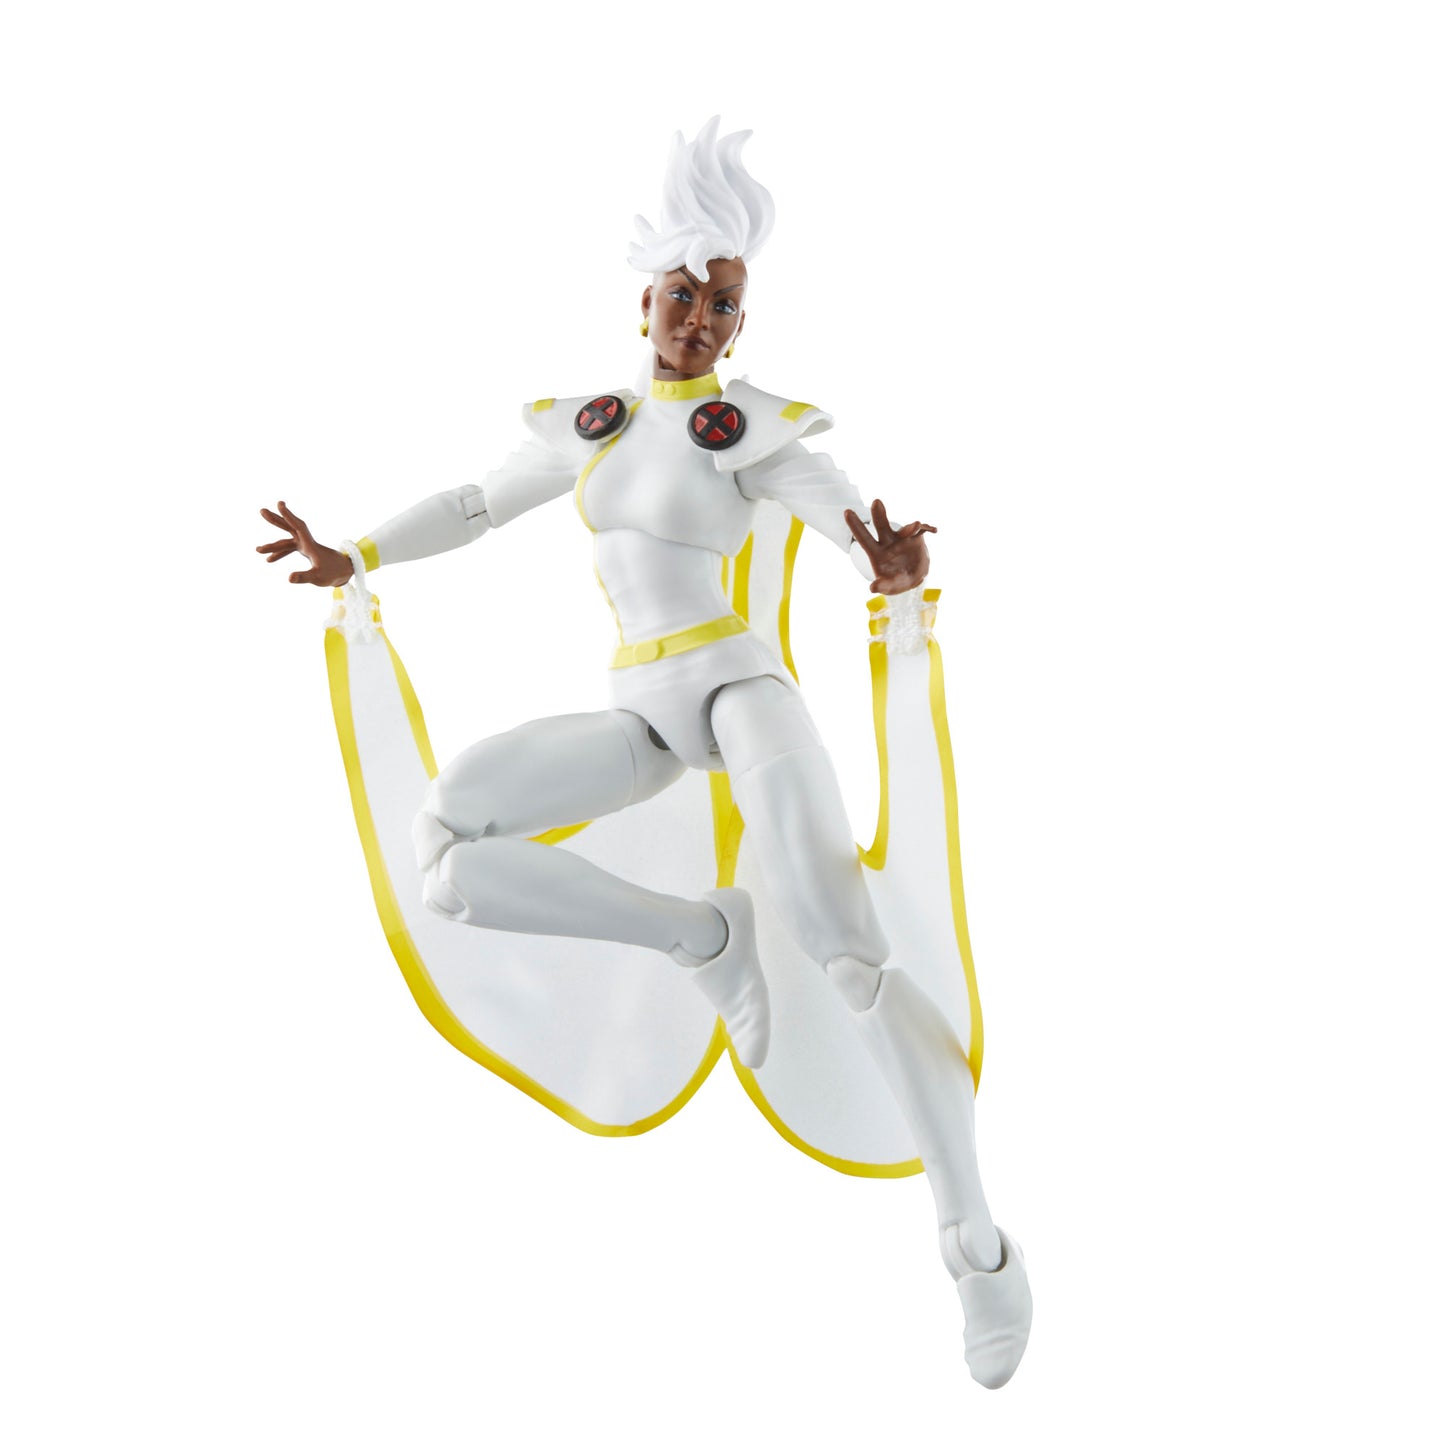 Hasbro Marvel Legends Series Storm Action Figure Toy posed - Heretoserveyou